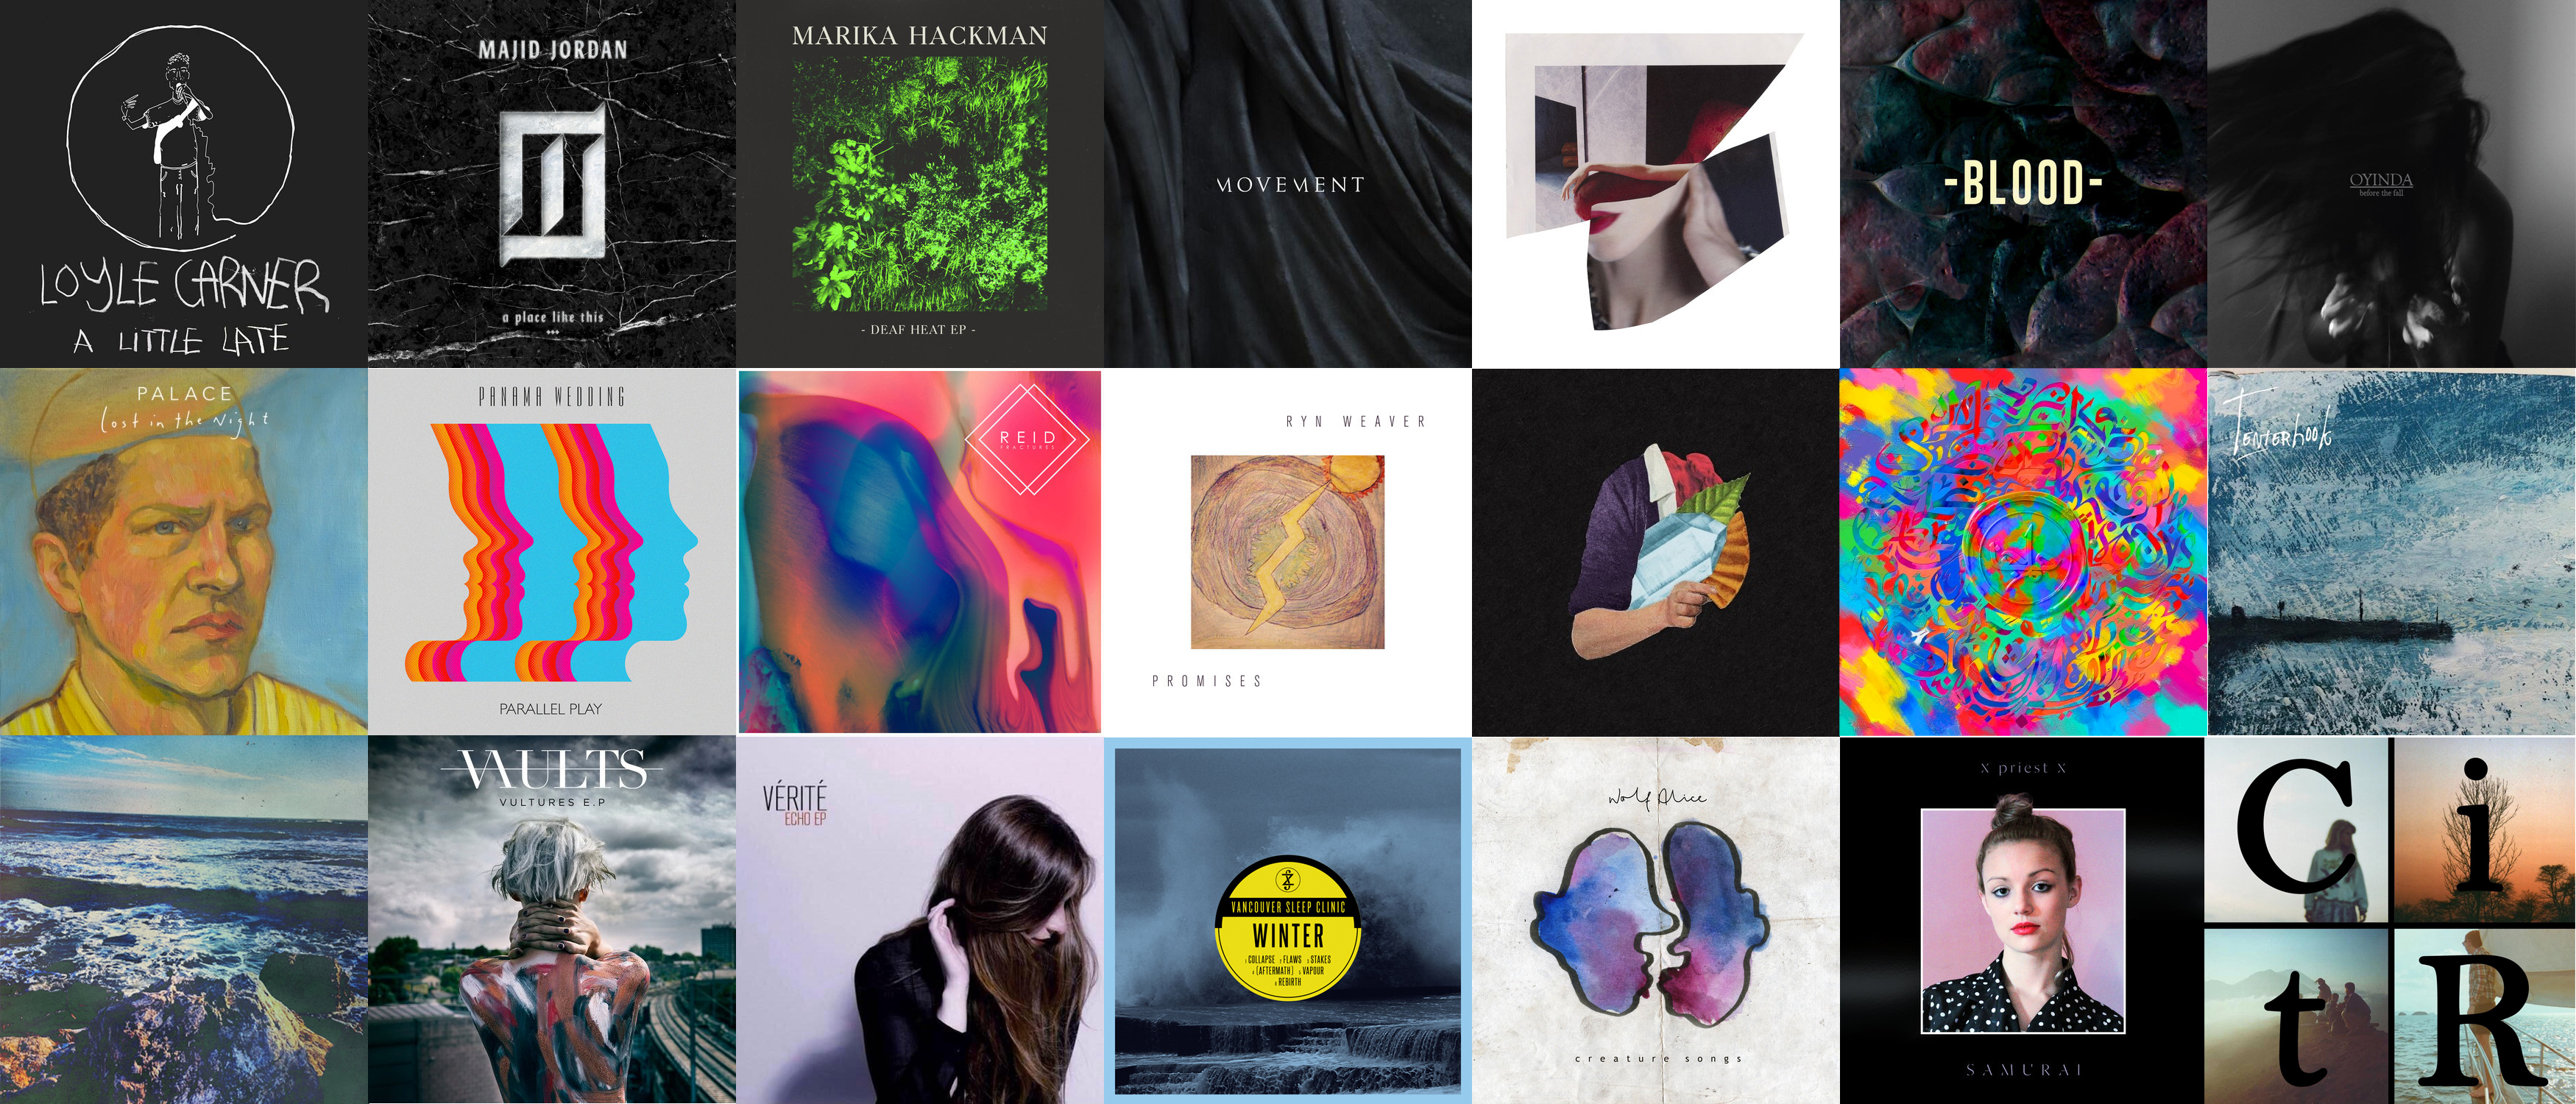 2014: 40 Essential EPs From 2014 (Part II)